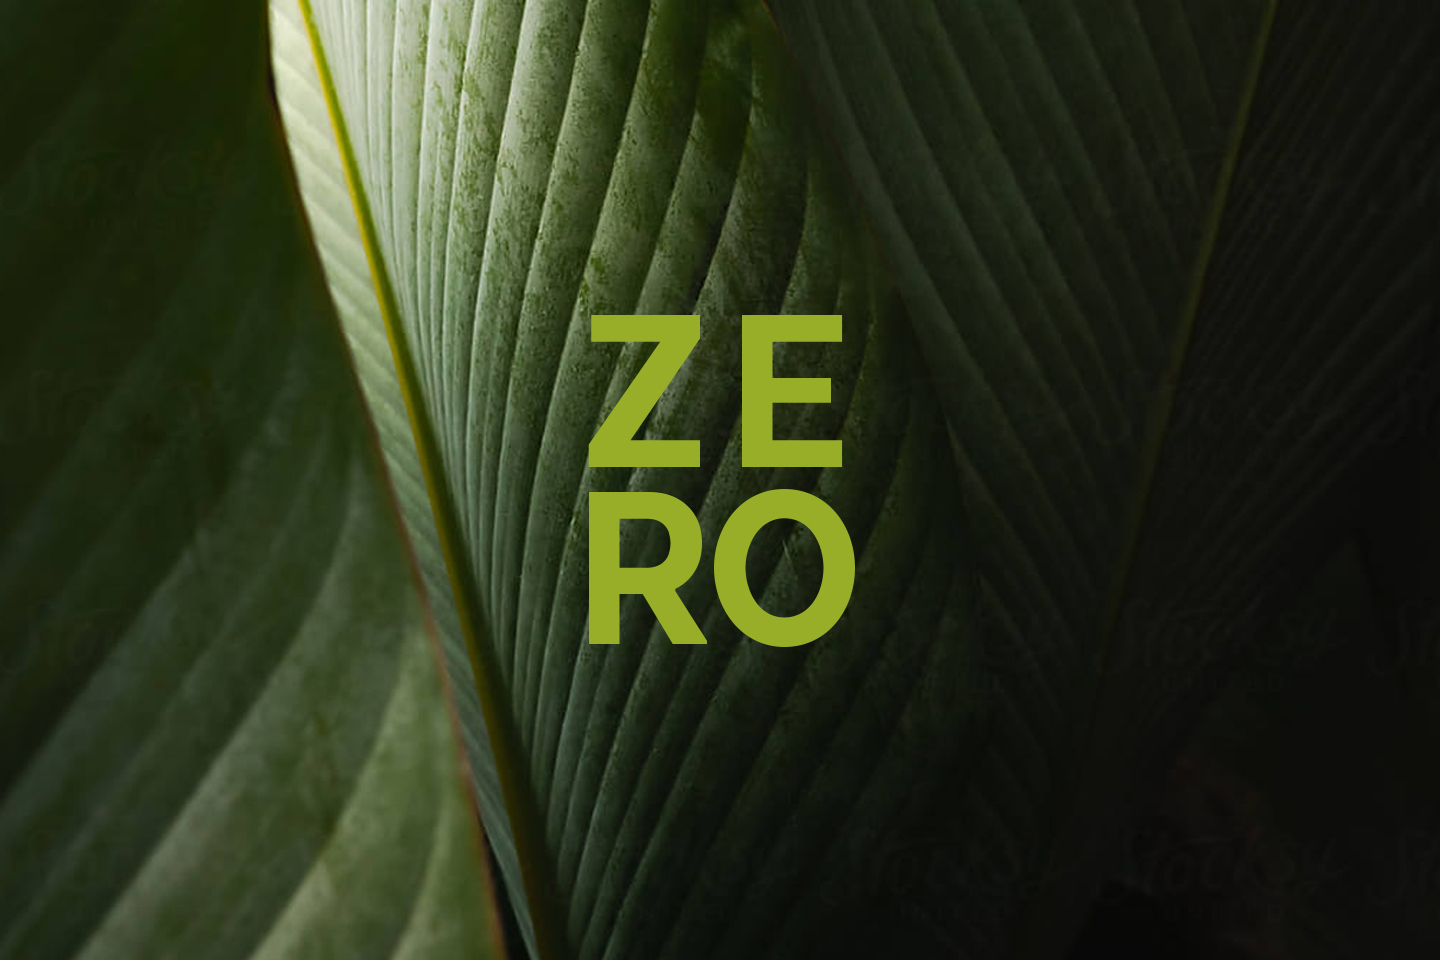 Green leaves with the word 'Zero' super imposed over the top